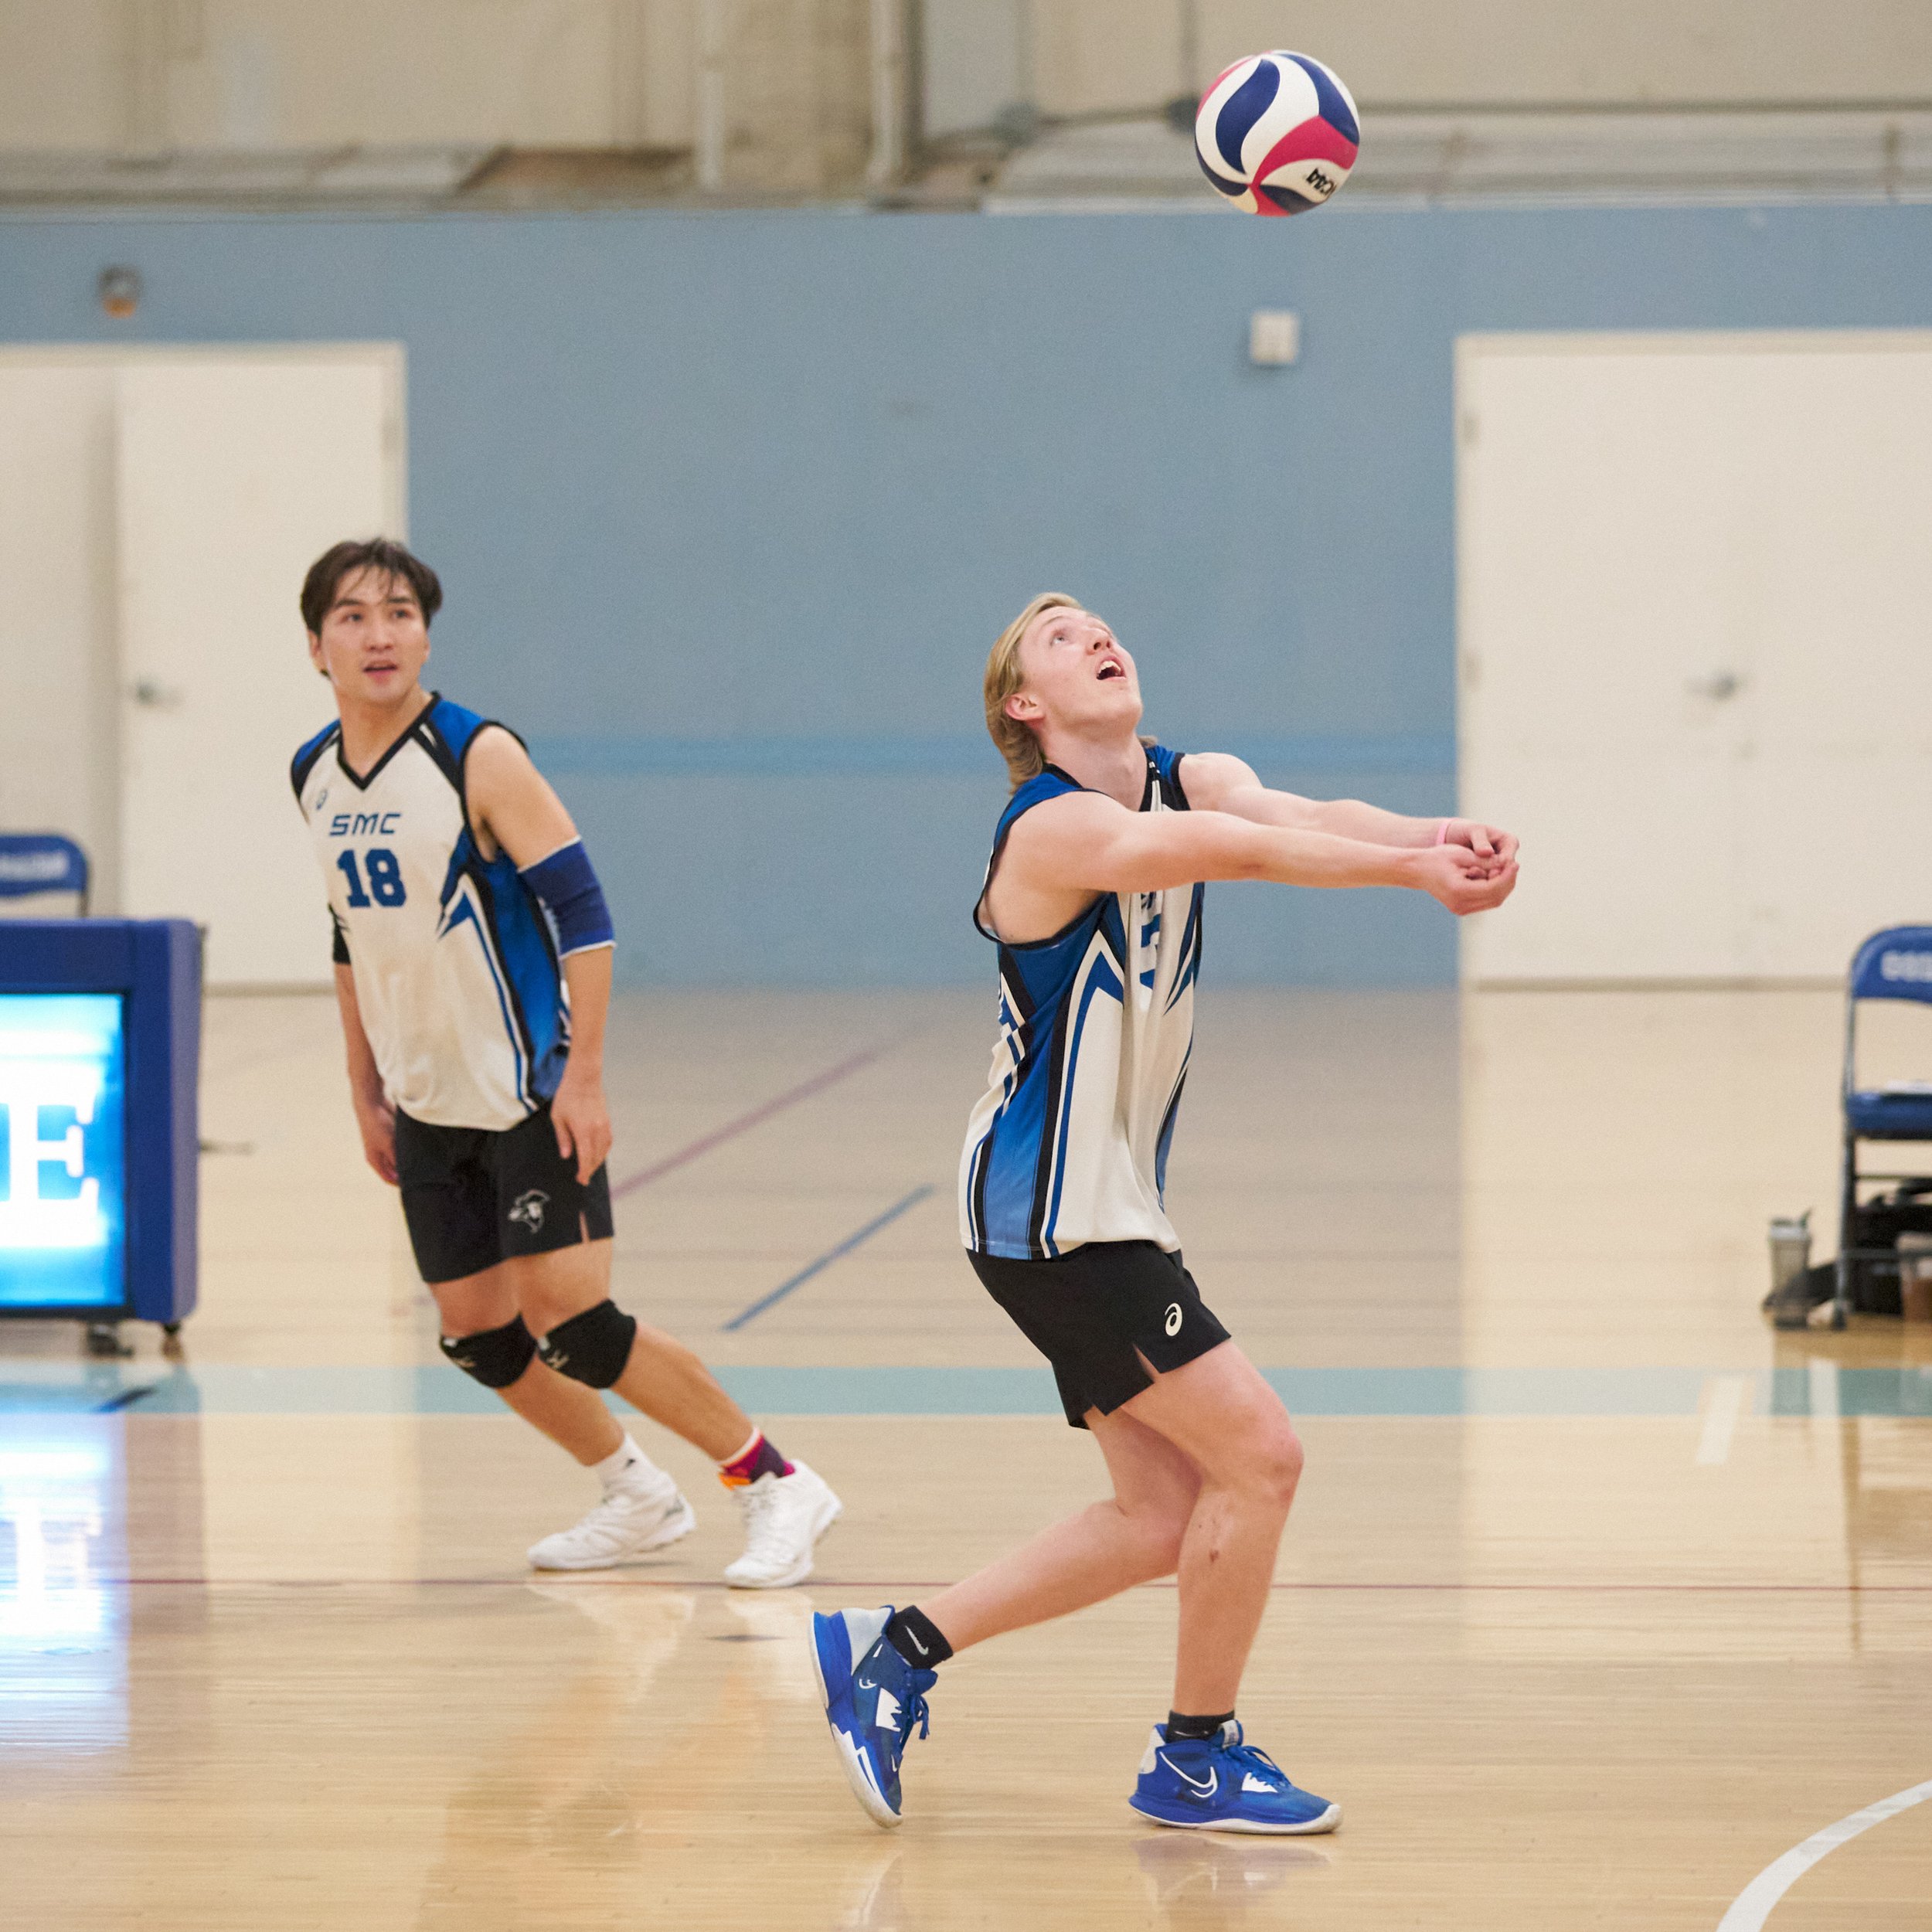  Santa Monica College Corsairs' Camden Higbee (right) bumps the ball, with Enkhtur Tserendavaa (left) behind him during the men's volleyball match against the Moorpark College Raiders on Wednesday, April 12, 2023, at Corsair Gym in Santa Monica, Cali